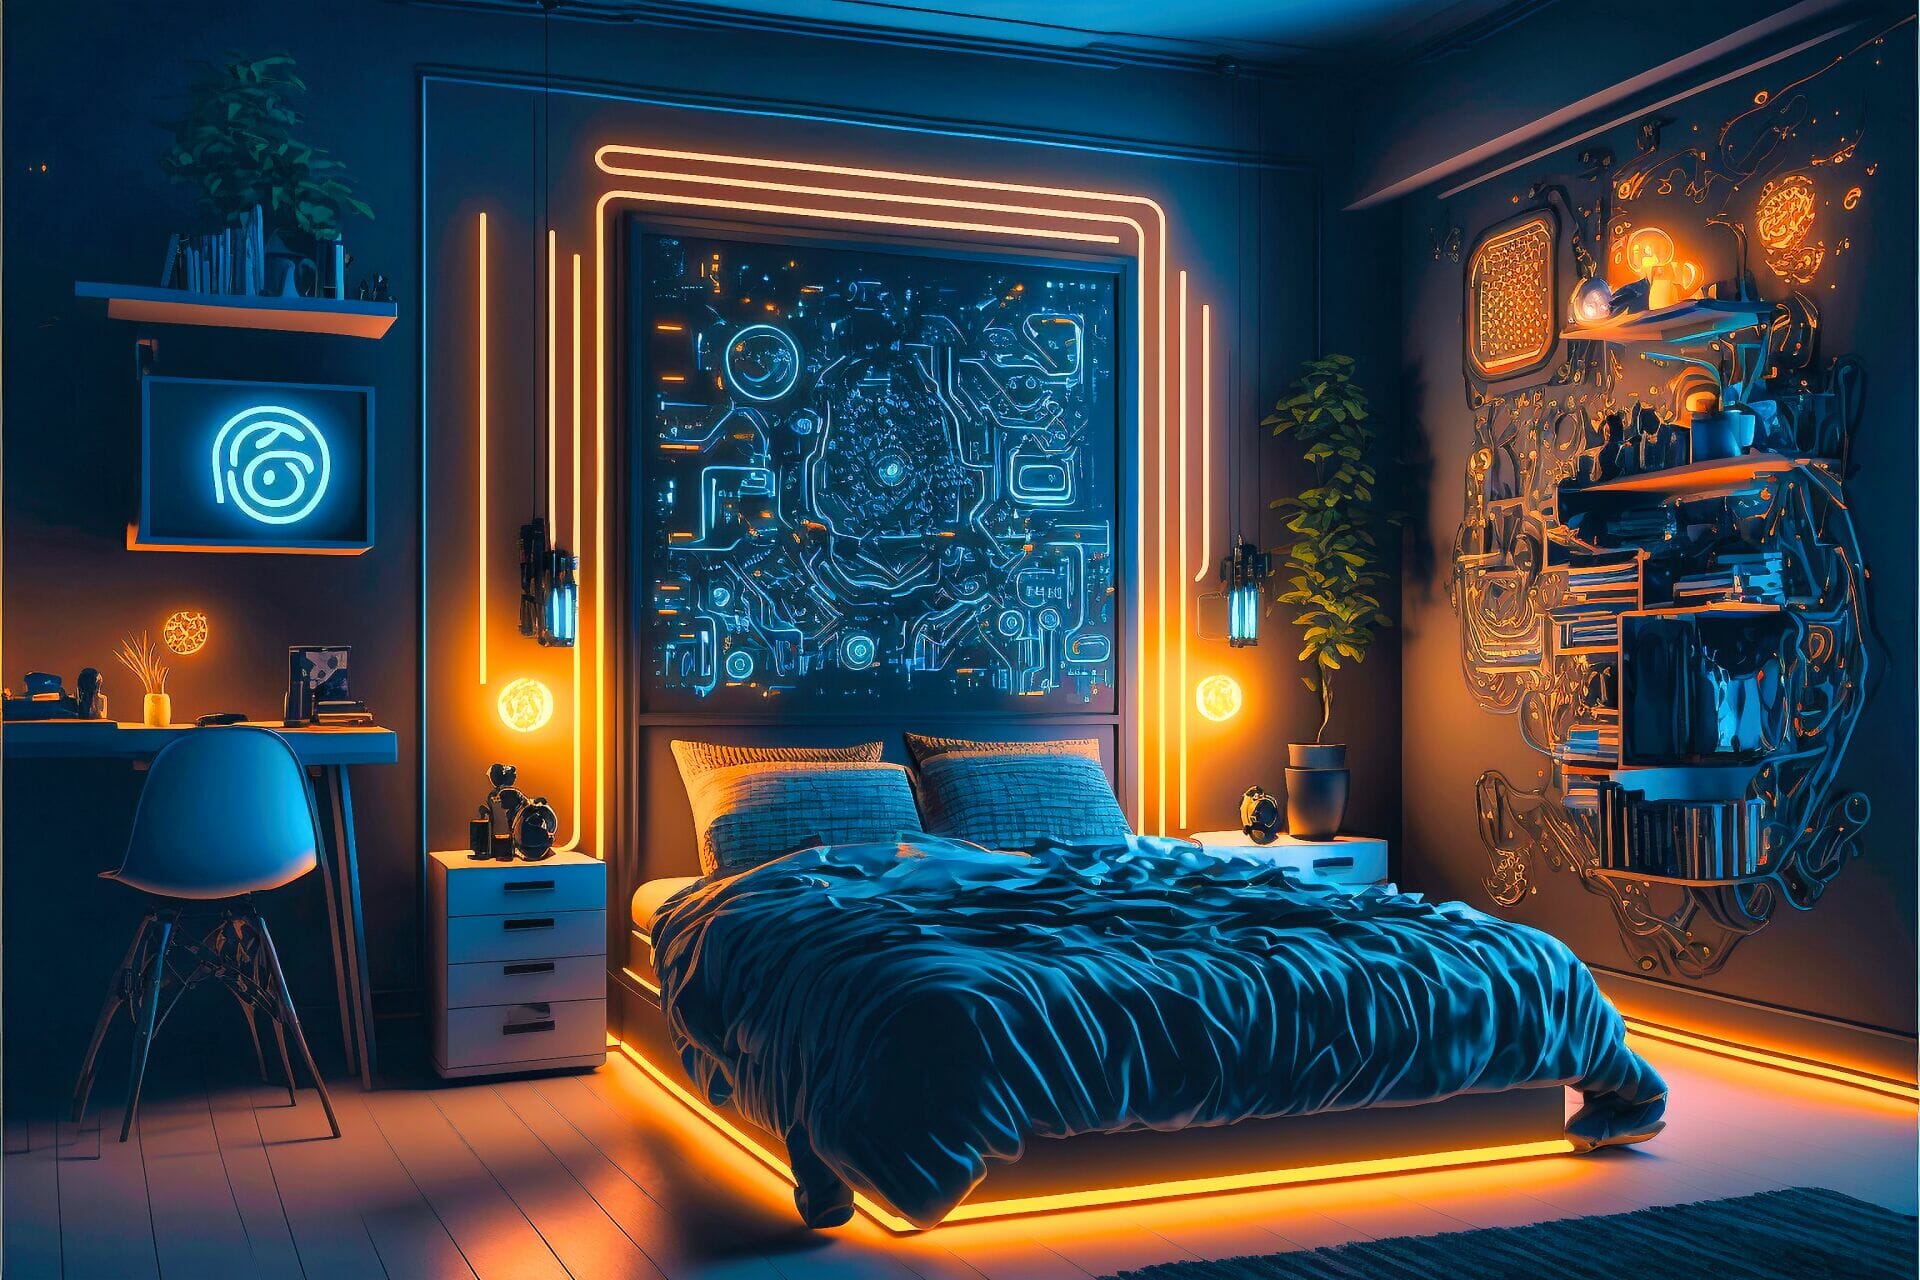 Futuristic Bedroom With A Modern, Cyberpunk Feel. The Walls Are Painted A Deep Blue And Are Adorned With Multiple Computer Screens, Glowing Neon Accents And Abstract Patterns. The Bed Is A Bright, Glowing Yellow And The Nightstands Are Sleek And Modern. The Lighting Is Low And Ambient, With A Neon Strip Running Along The Walls. The Floor Is Black Tile, With A Glossy Finish. A Large, Wall-Mounted Television Is Hung Above The Bed. Various Gadgets And Appliances Are Scattered Around The Room, From Cyberpunk-Style Furniture To Robotic Arms And Other Futuristic Gadgets.